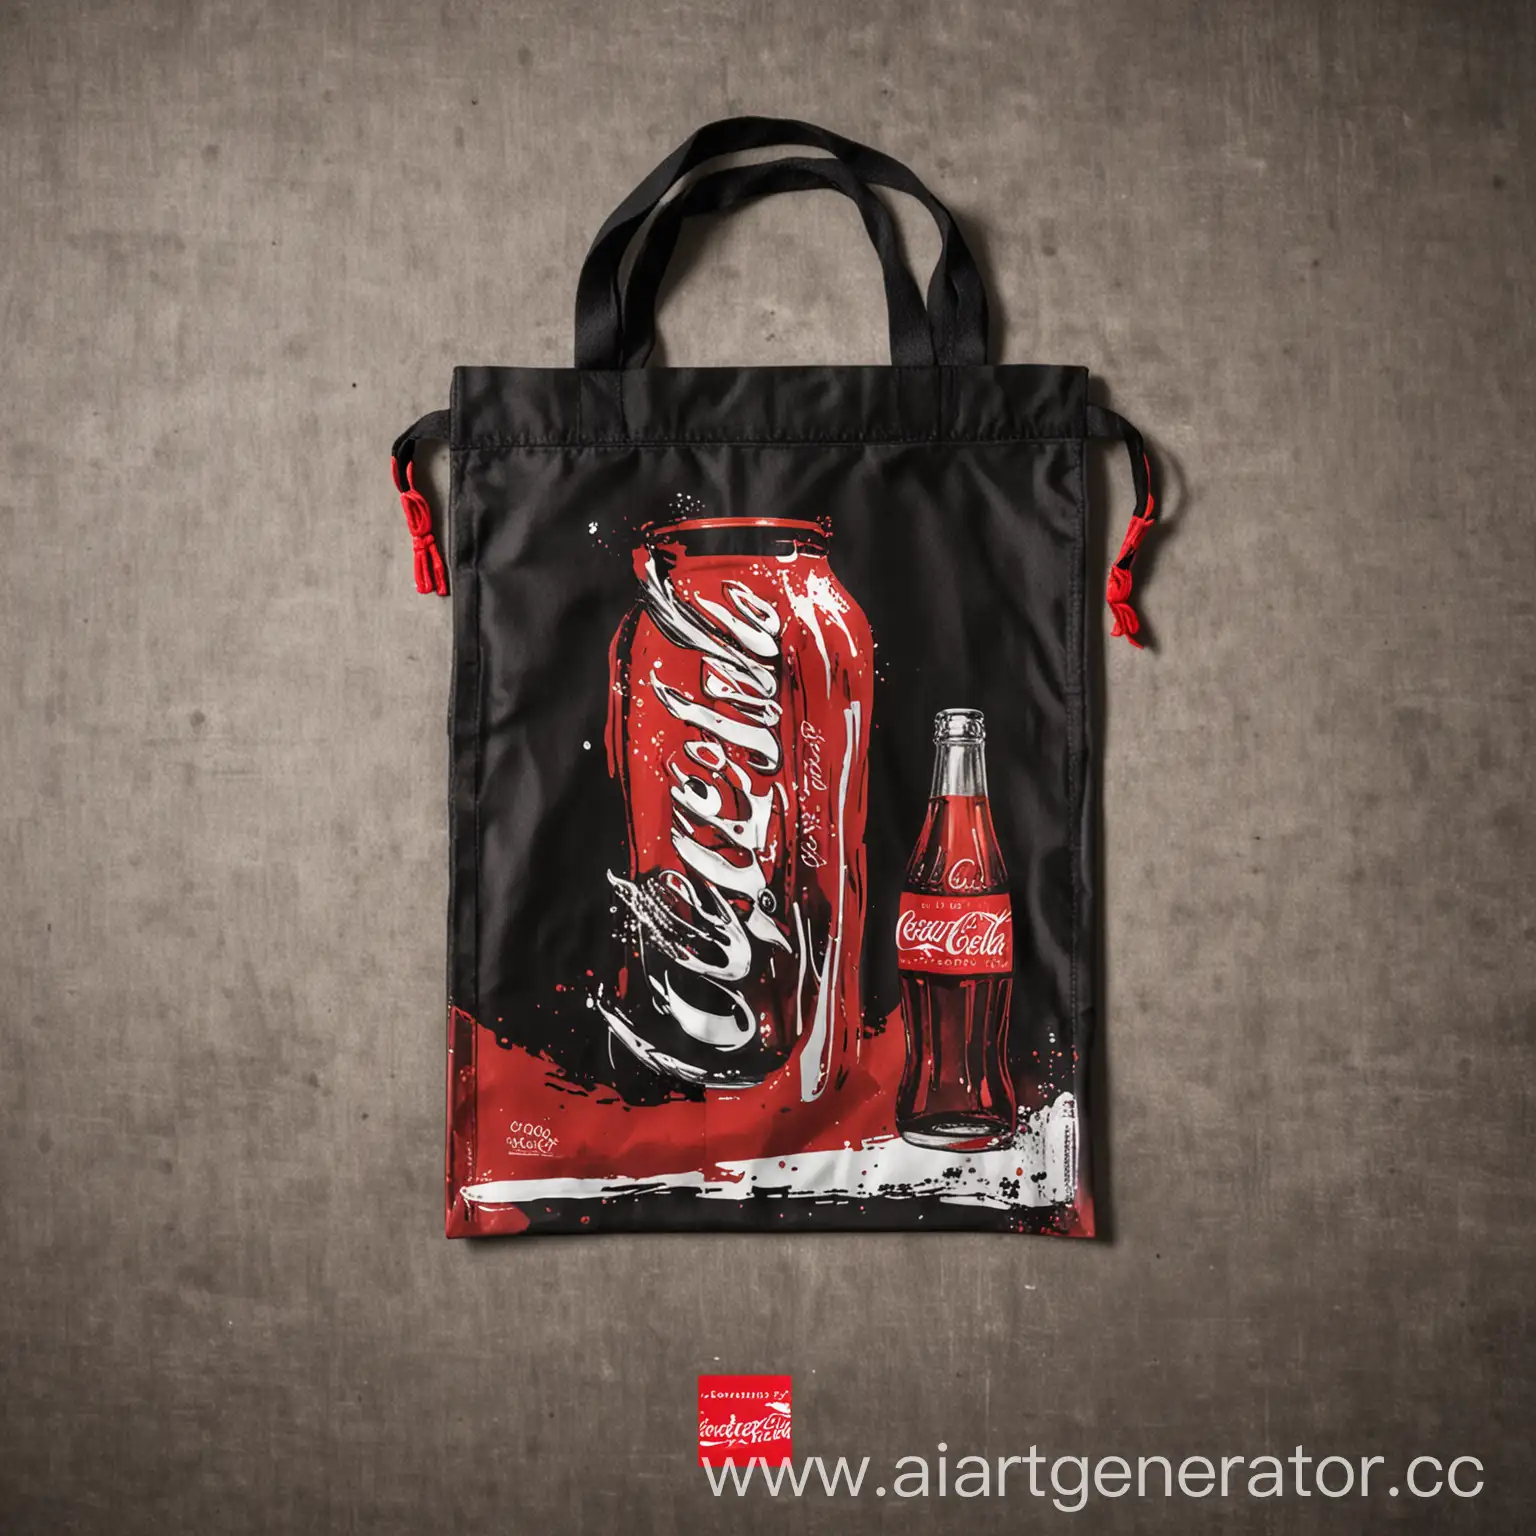 Colorful-Coca-Cola-Merchandise-Bag-with-Logo-and-Products-Displayed